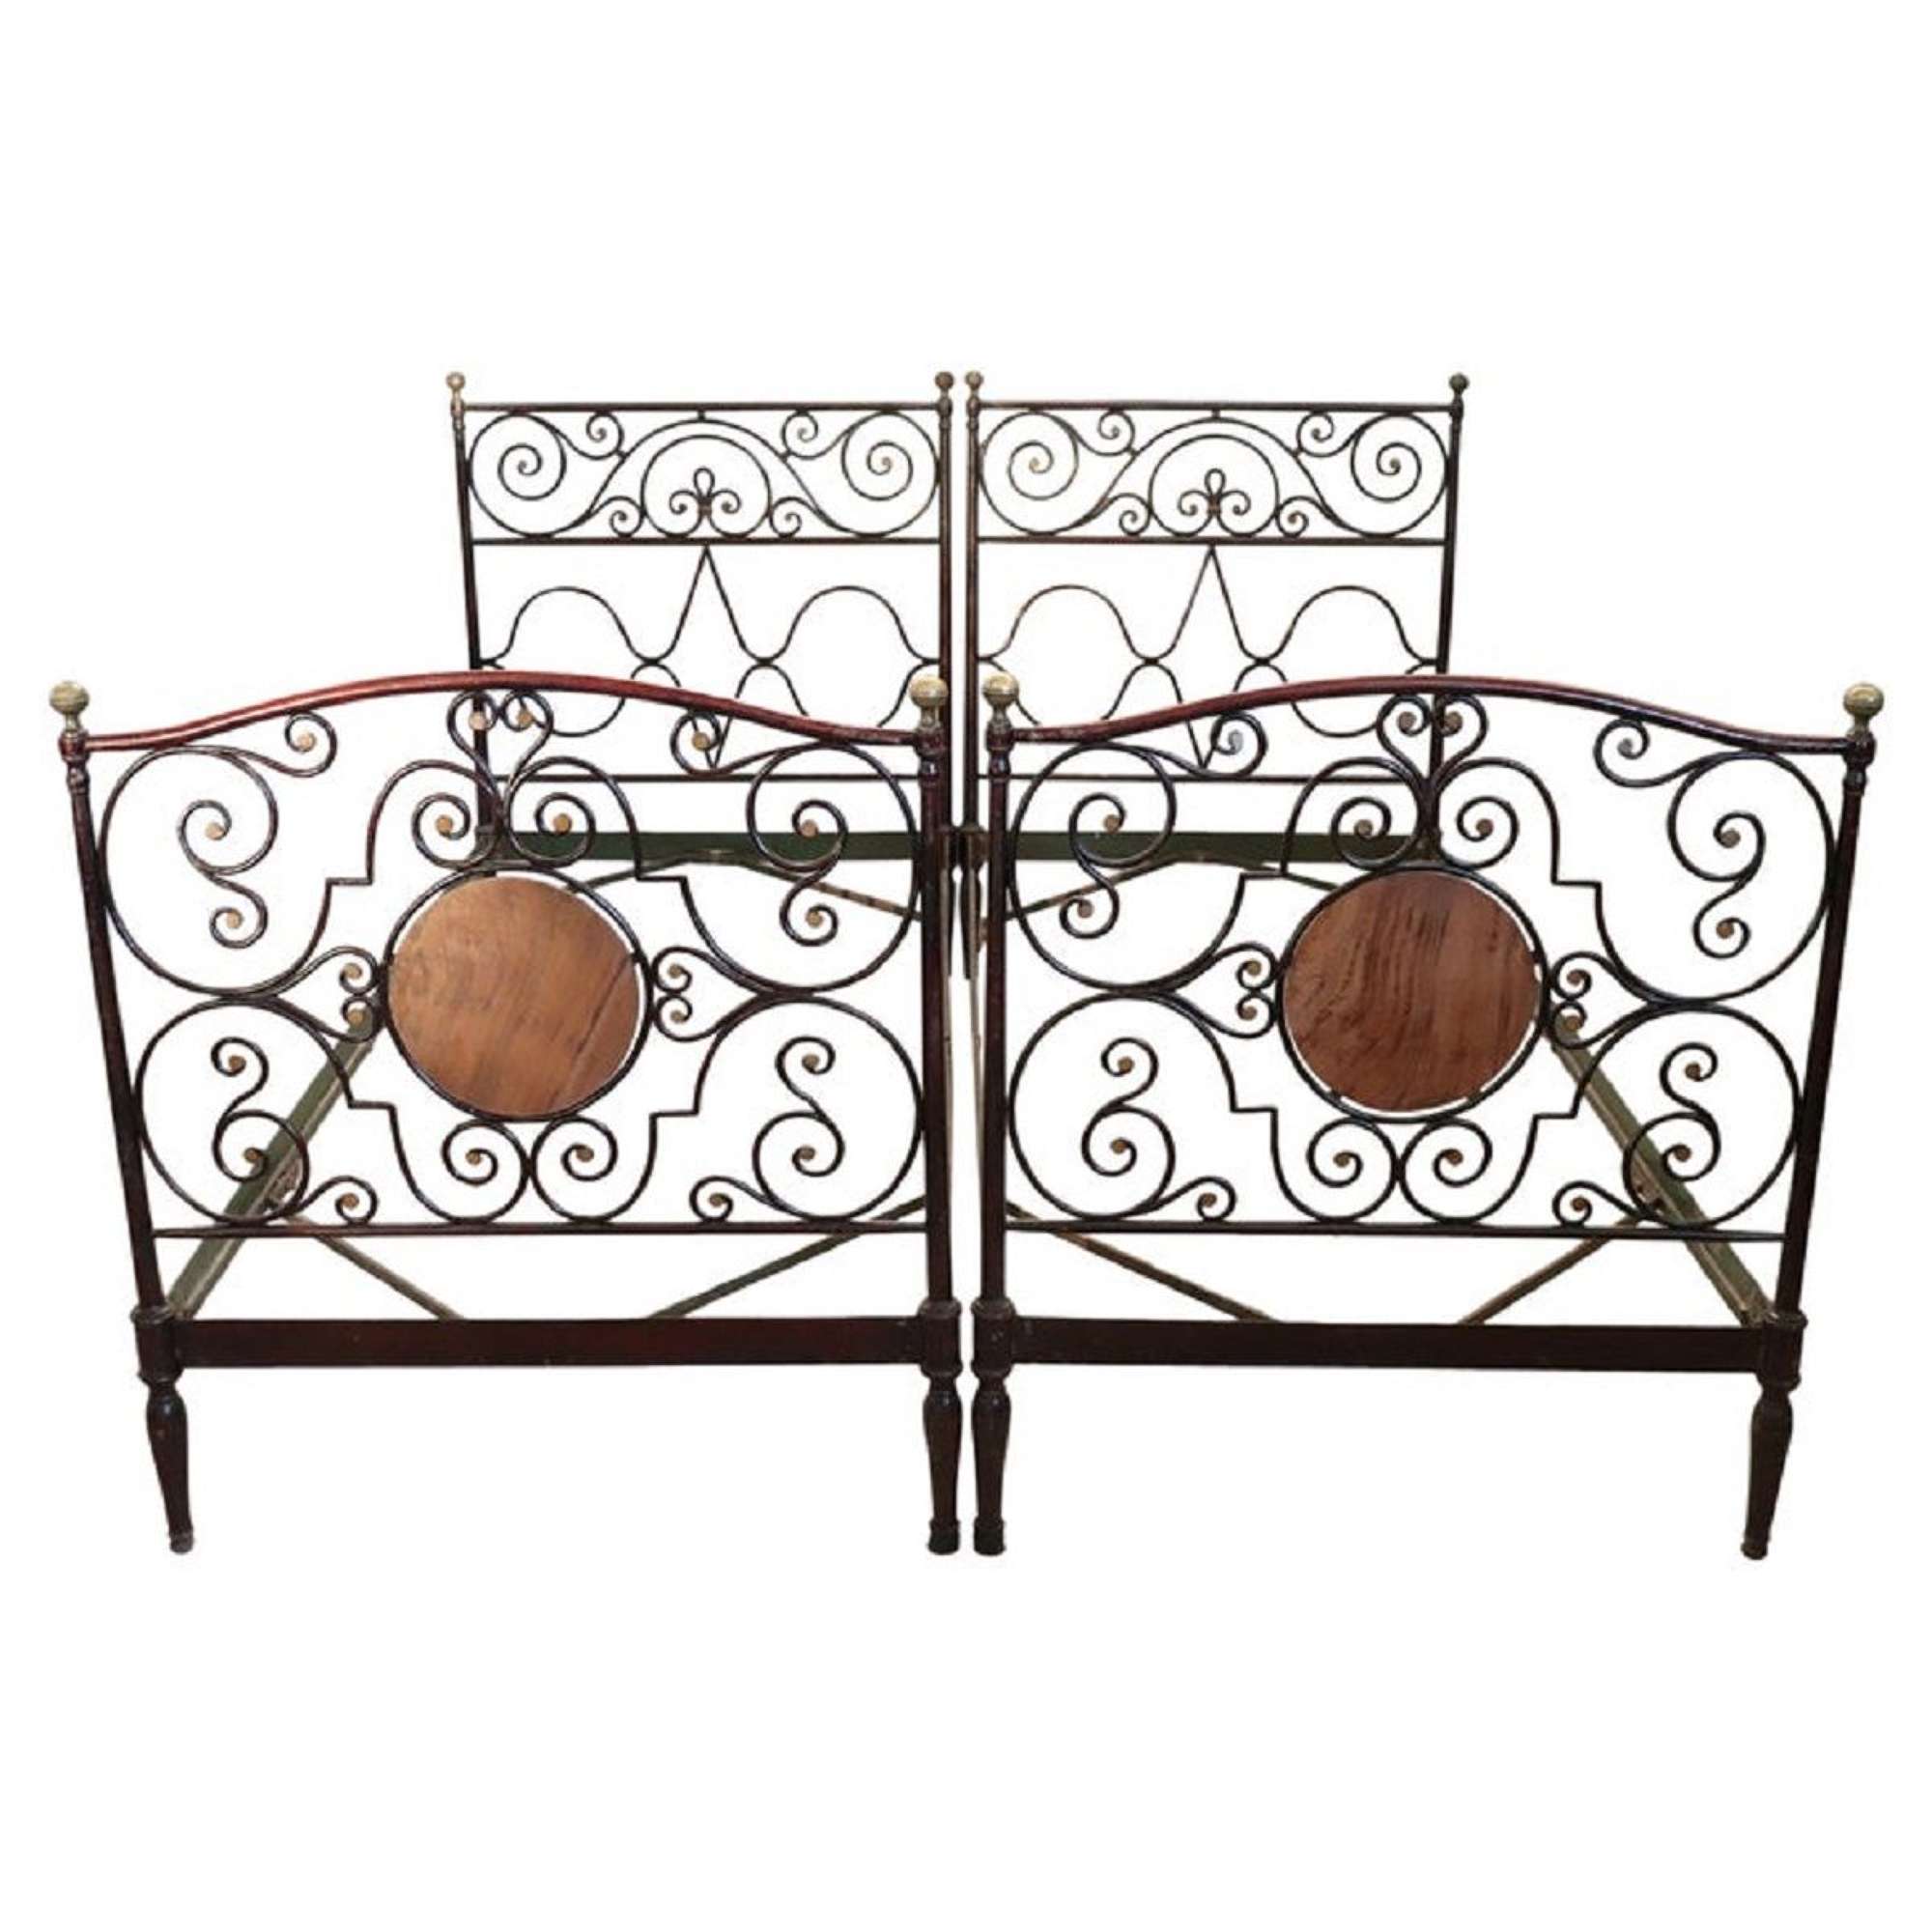 Single Beds in Iron, 19th Century, Set of 2